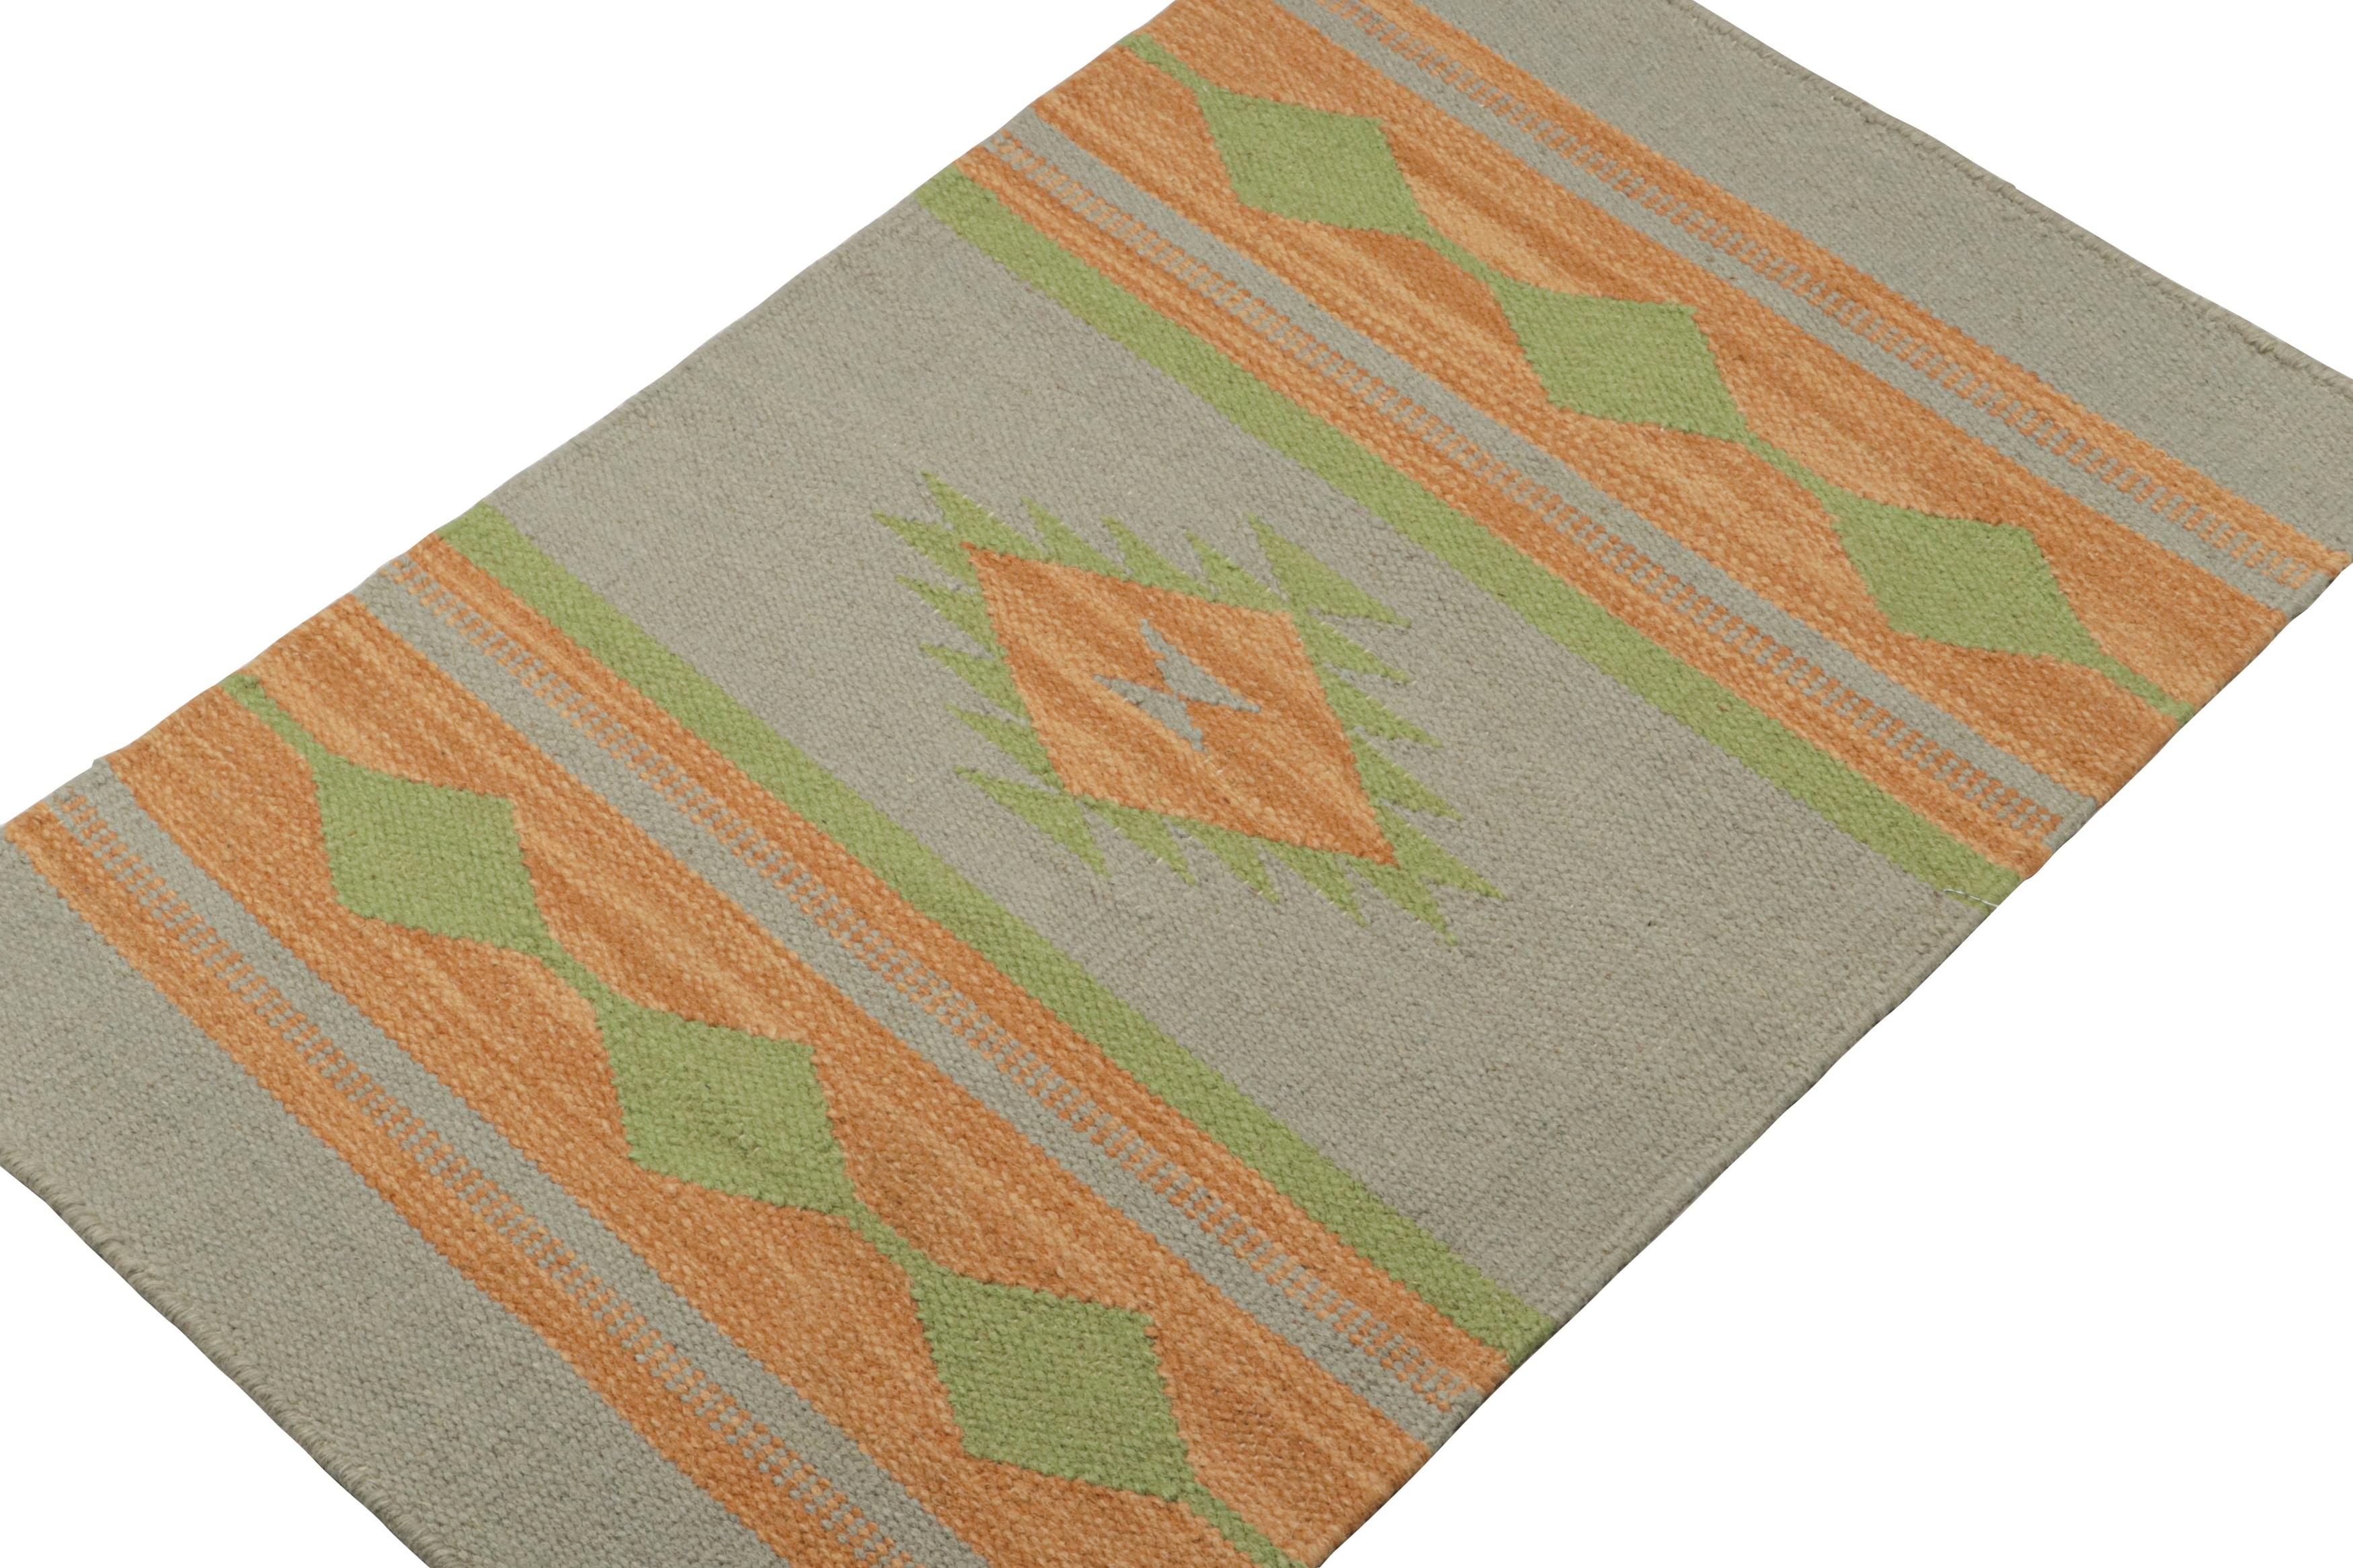 Inspired by tribal kilims, this 2x3 piece is an elegant new addition to the flatweave collection by Rug & Kilim.  

On the Design: 

Handwoven in wool, this contemporary kilim carries gold & green geometric patterns on grey. Further enjoying a smart